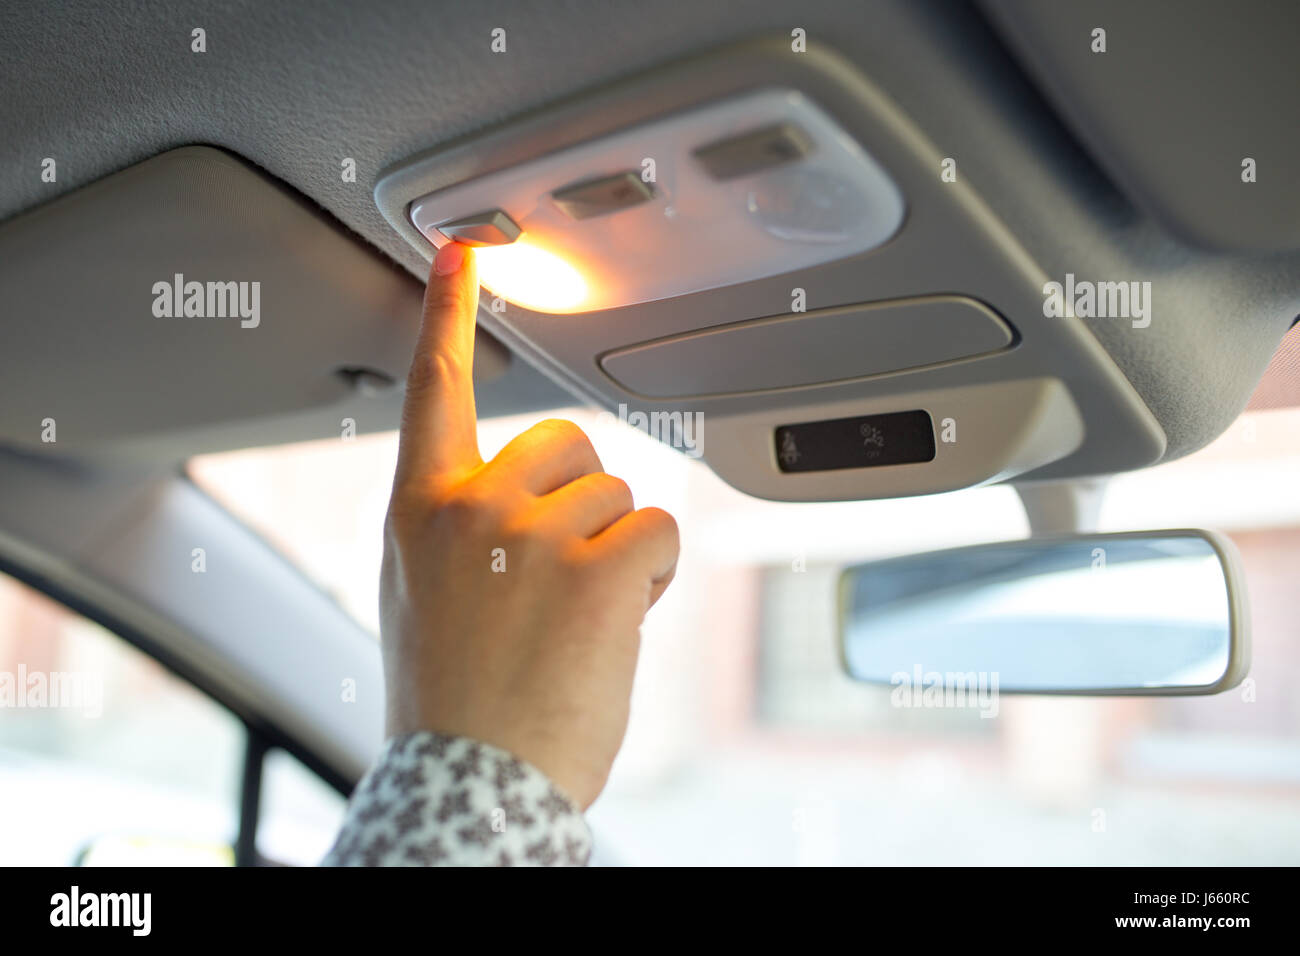 Man turning on the light in the car in his car, close-up Stock Photo